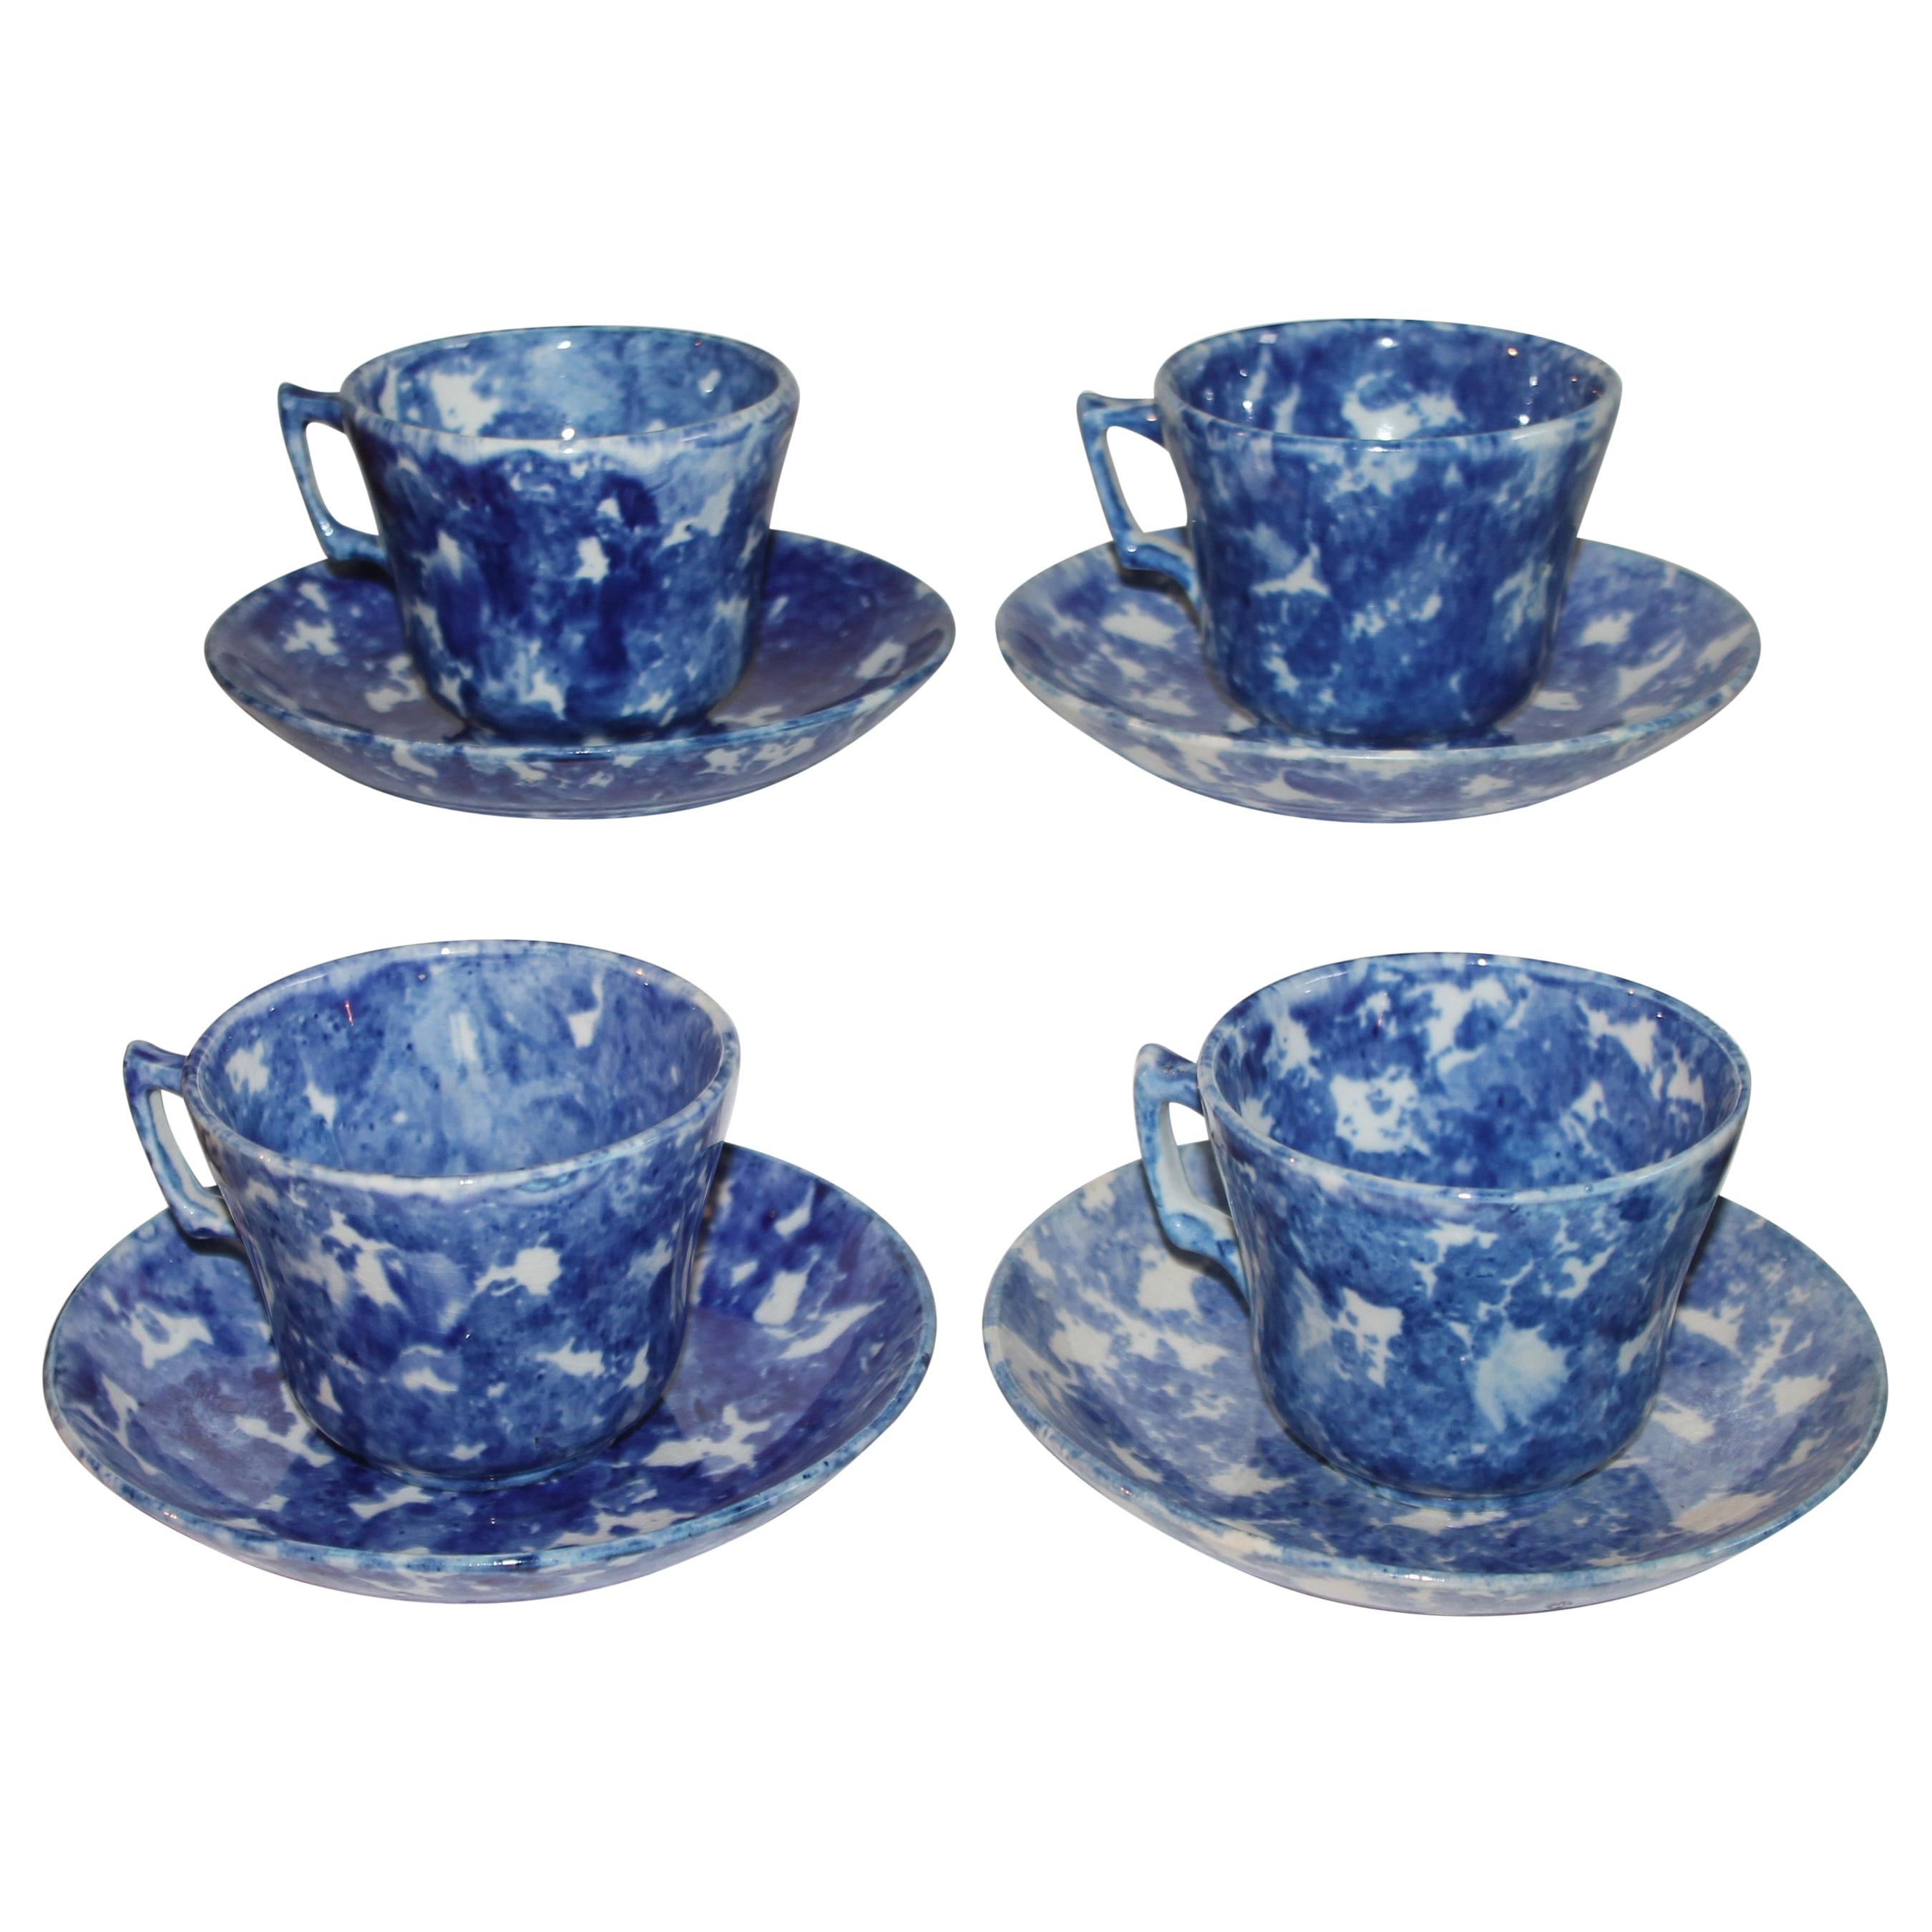 19thc Sponge Ware Cup and Saucers, Set of Four